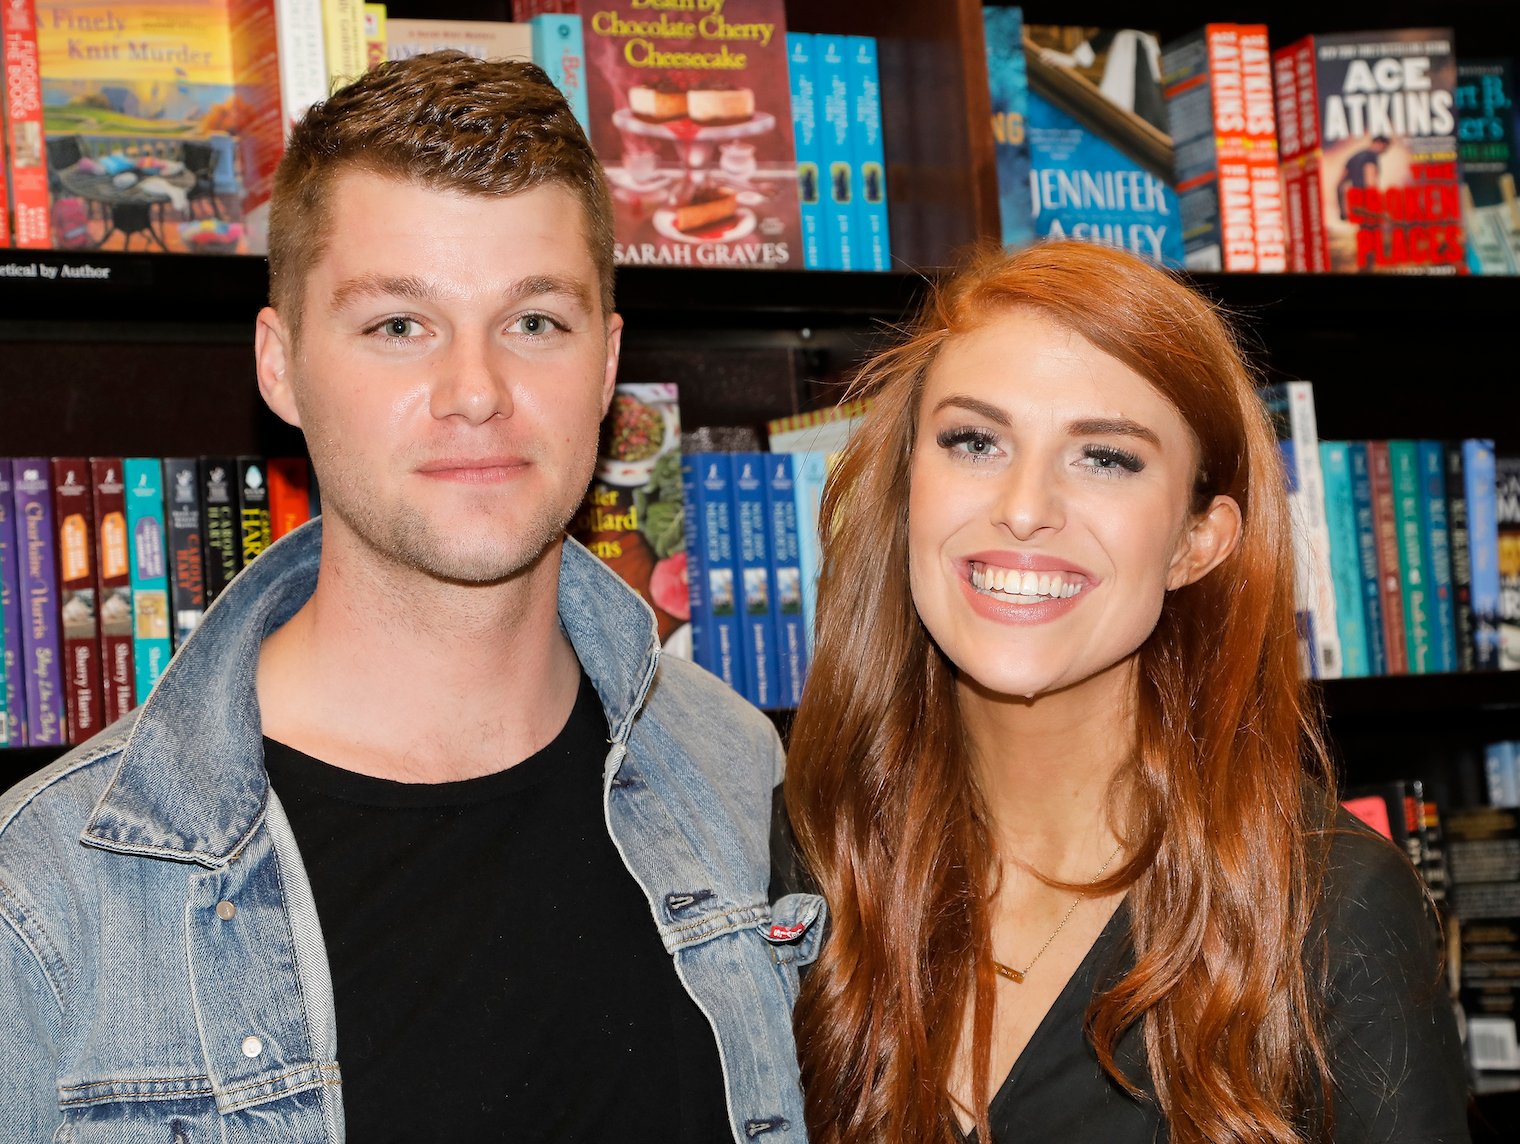 Jeremy Roloff and Audrey Roloff from 'Little People, Big World' standing next to each other in front of a book shelf